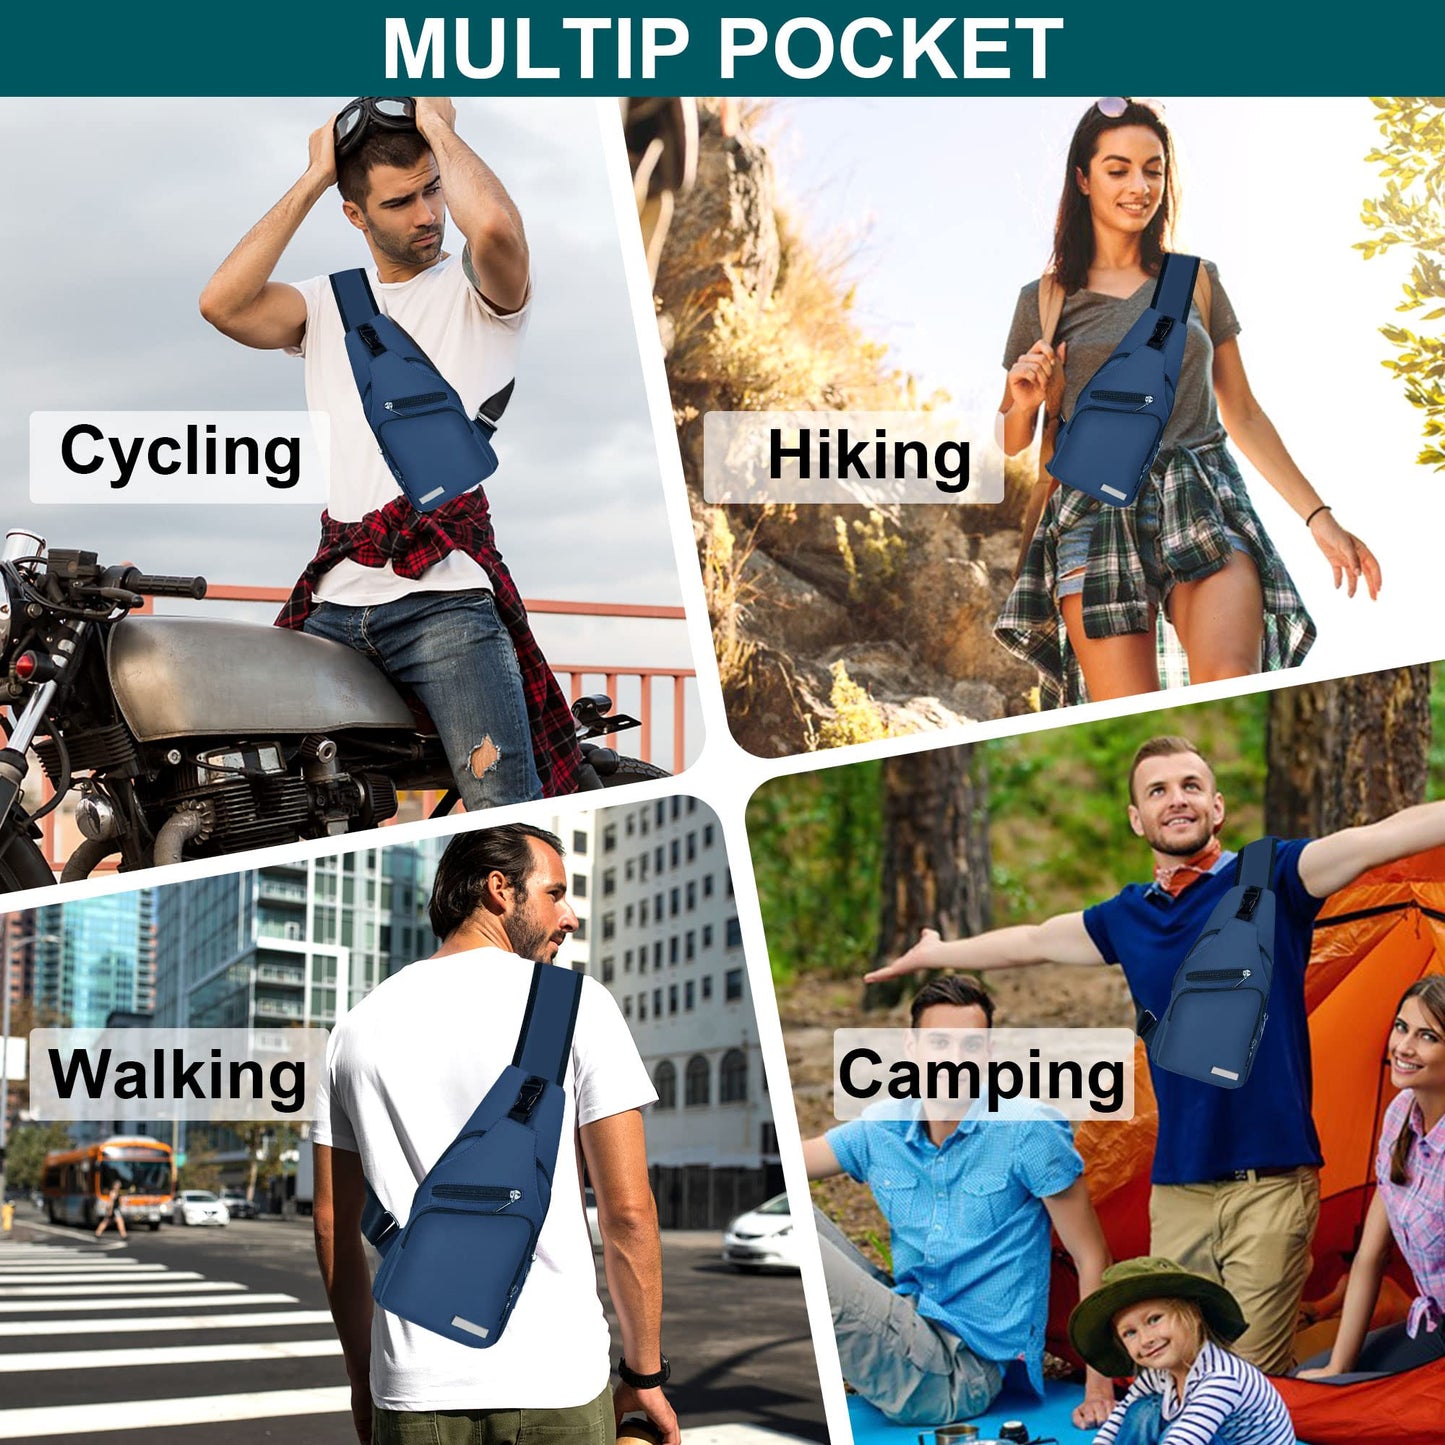 Sling Bag Crossbody Backpack for Women Men Chest Bag Hiking Bag with USB Charging Port for Camping Biking Travel Cycling